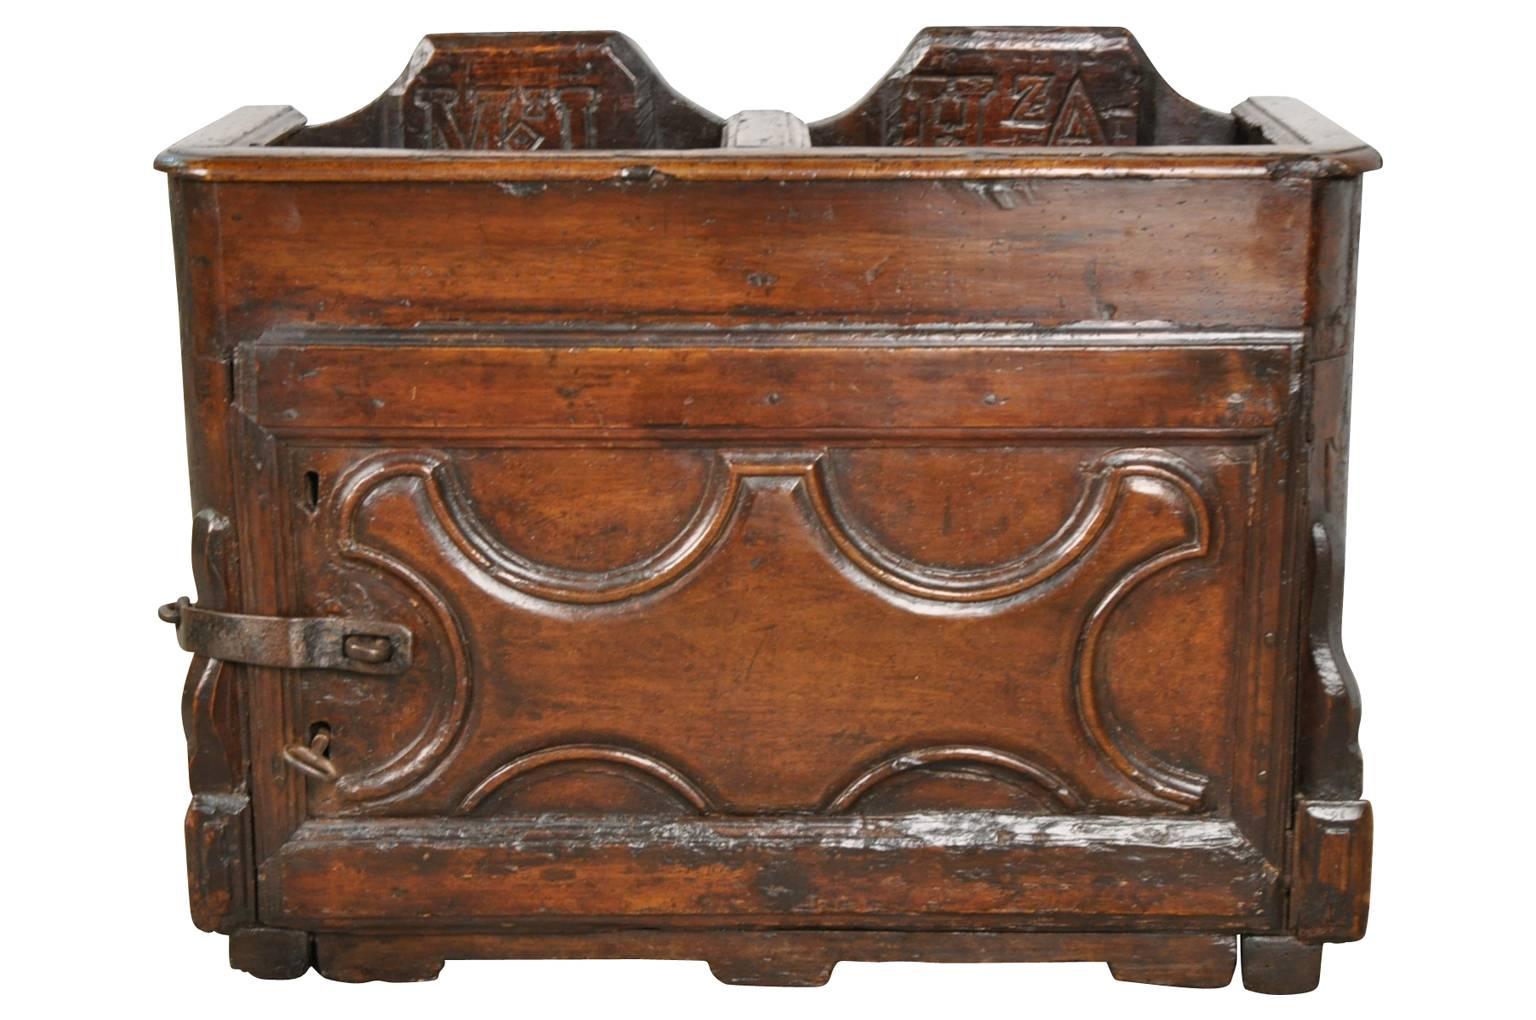 A rare and unique church collection box from Northern Italy. Beautifully constructed from thick planks of walnut with intriguing carving detail. A wonderful addition to any church or chapel. As well, this piece can be the perfect piggy bank!